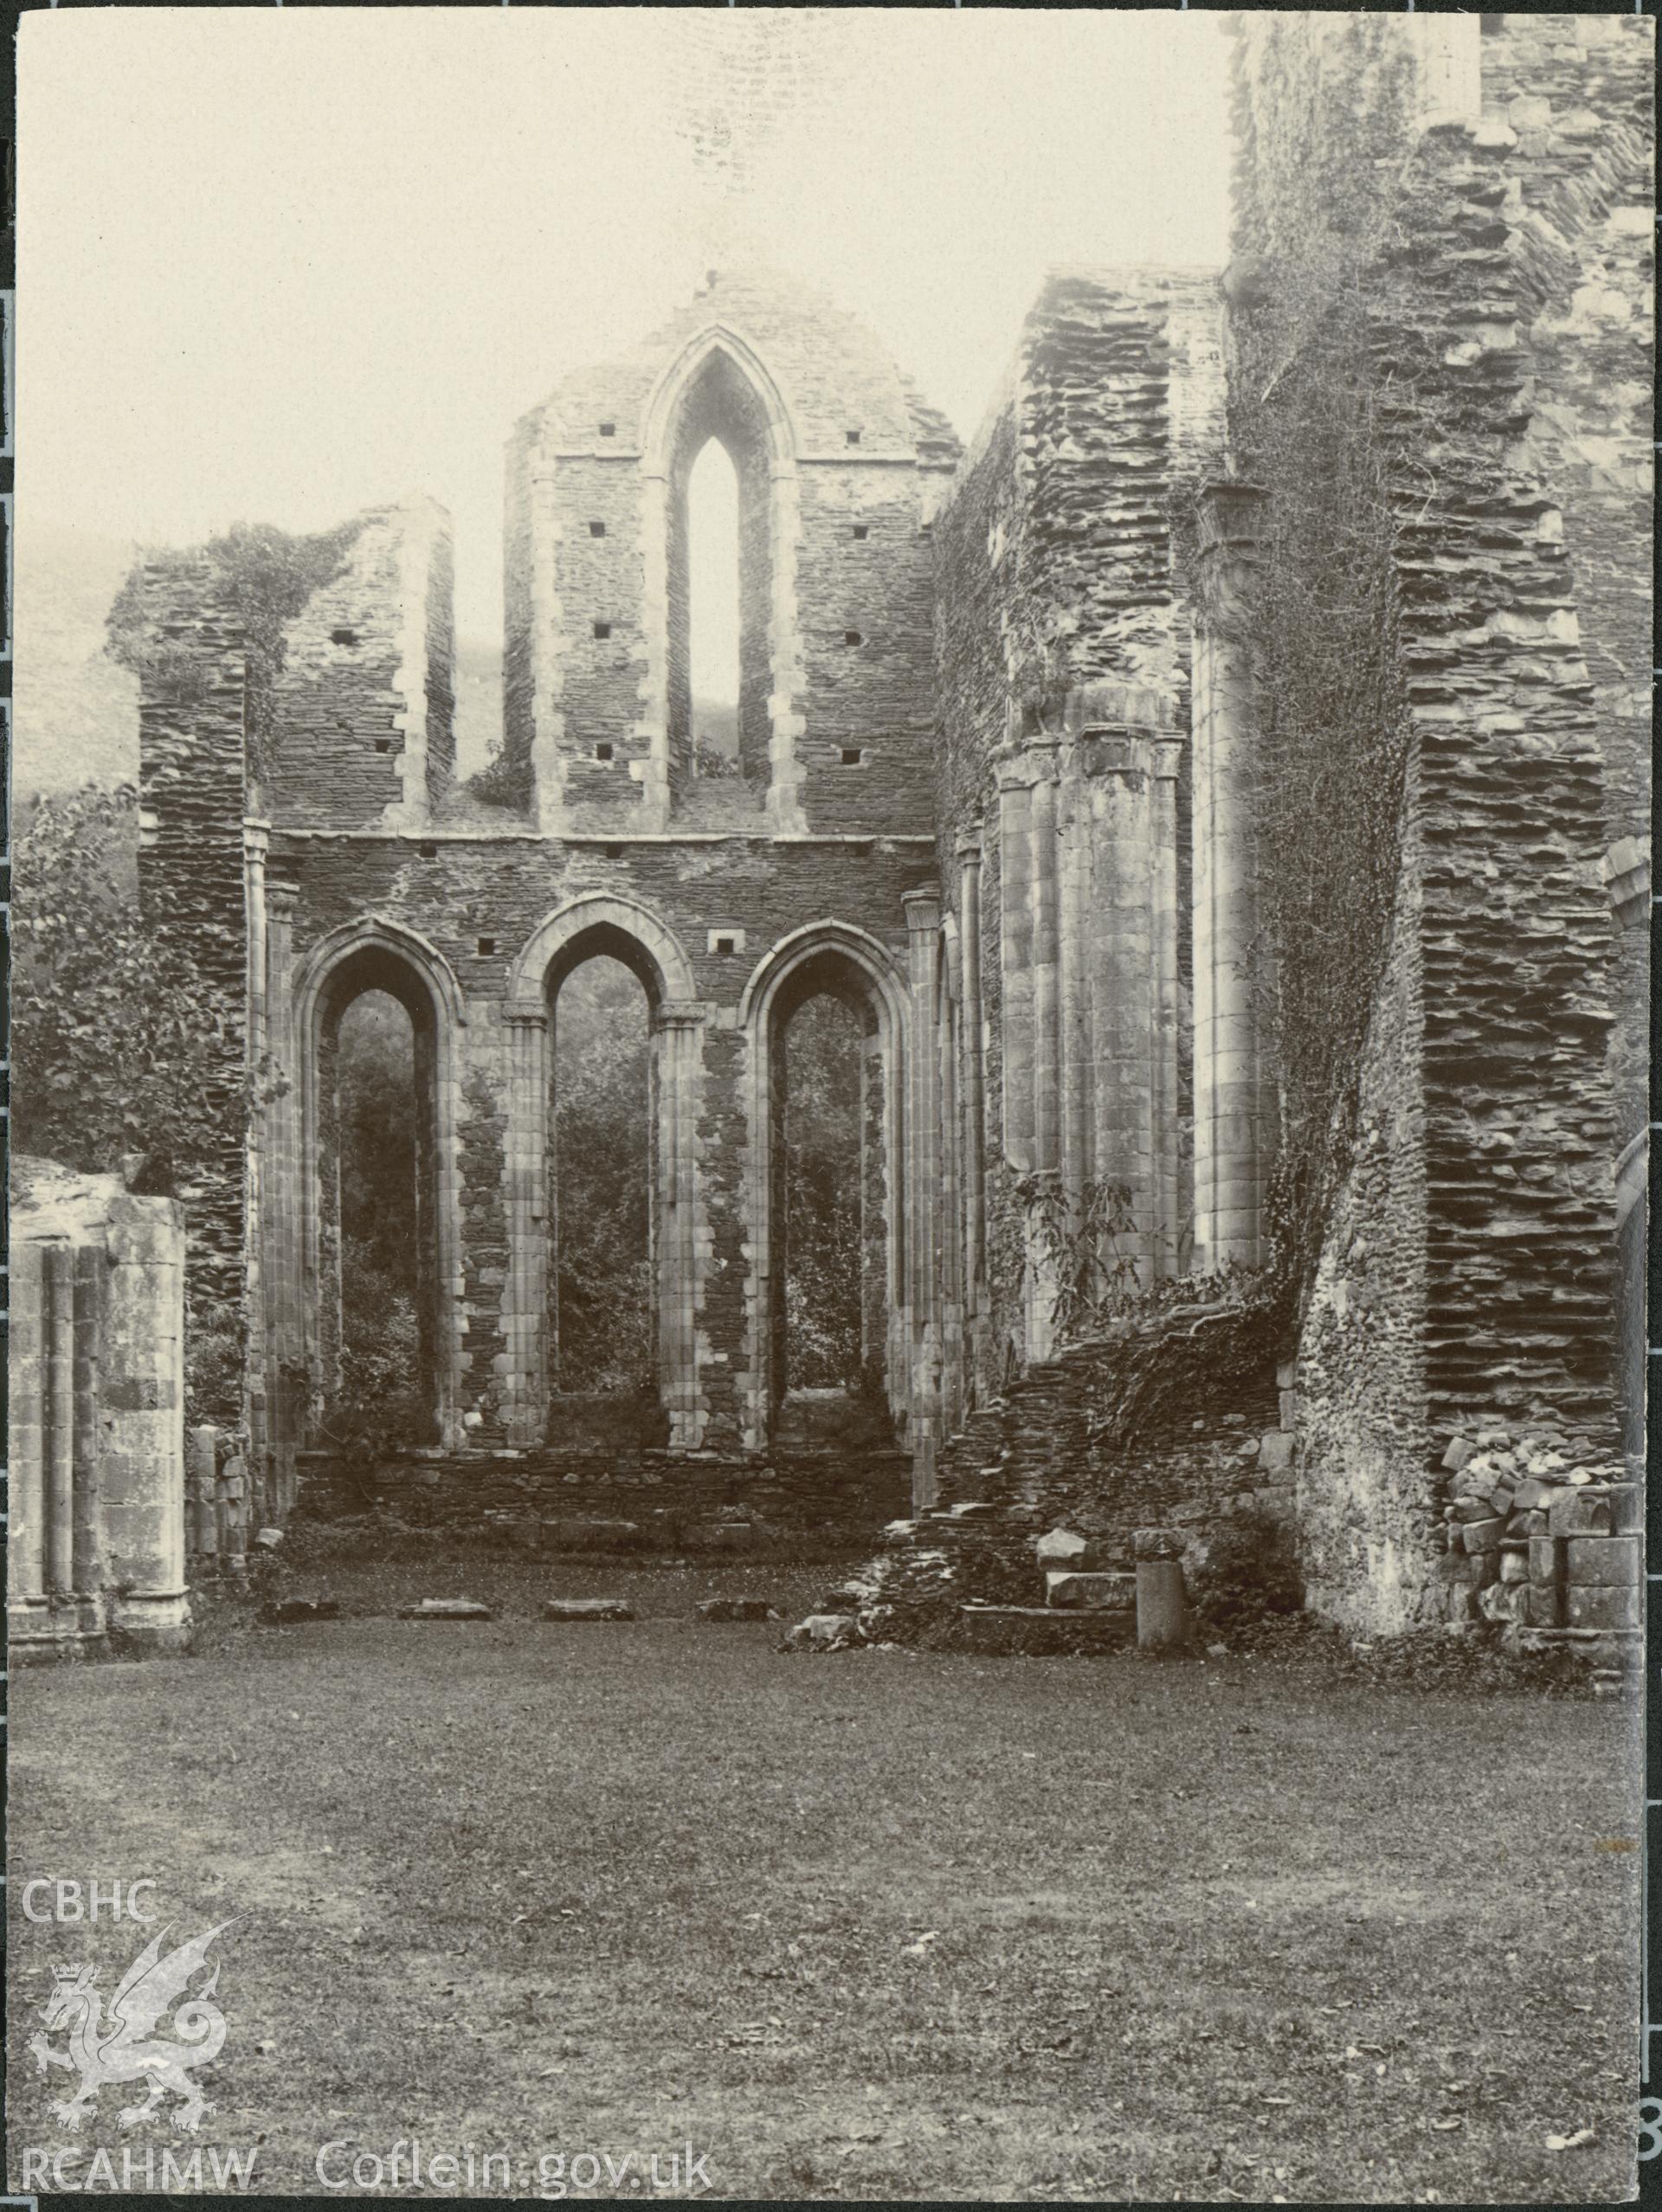 Albumen print by T.W. Reader showing general view of Valle Crucis Abbey.